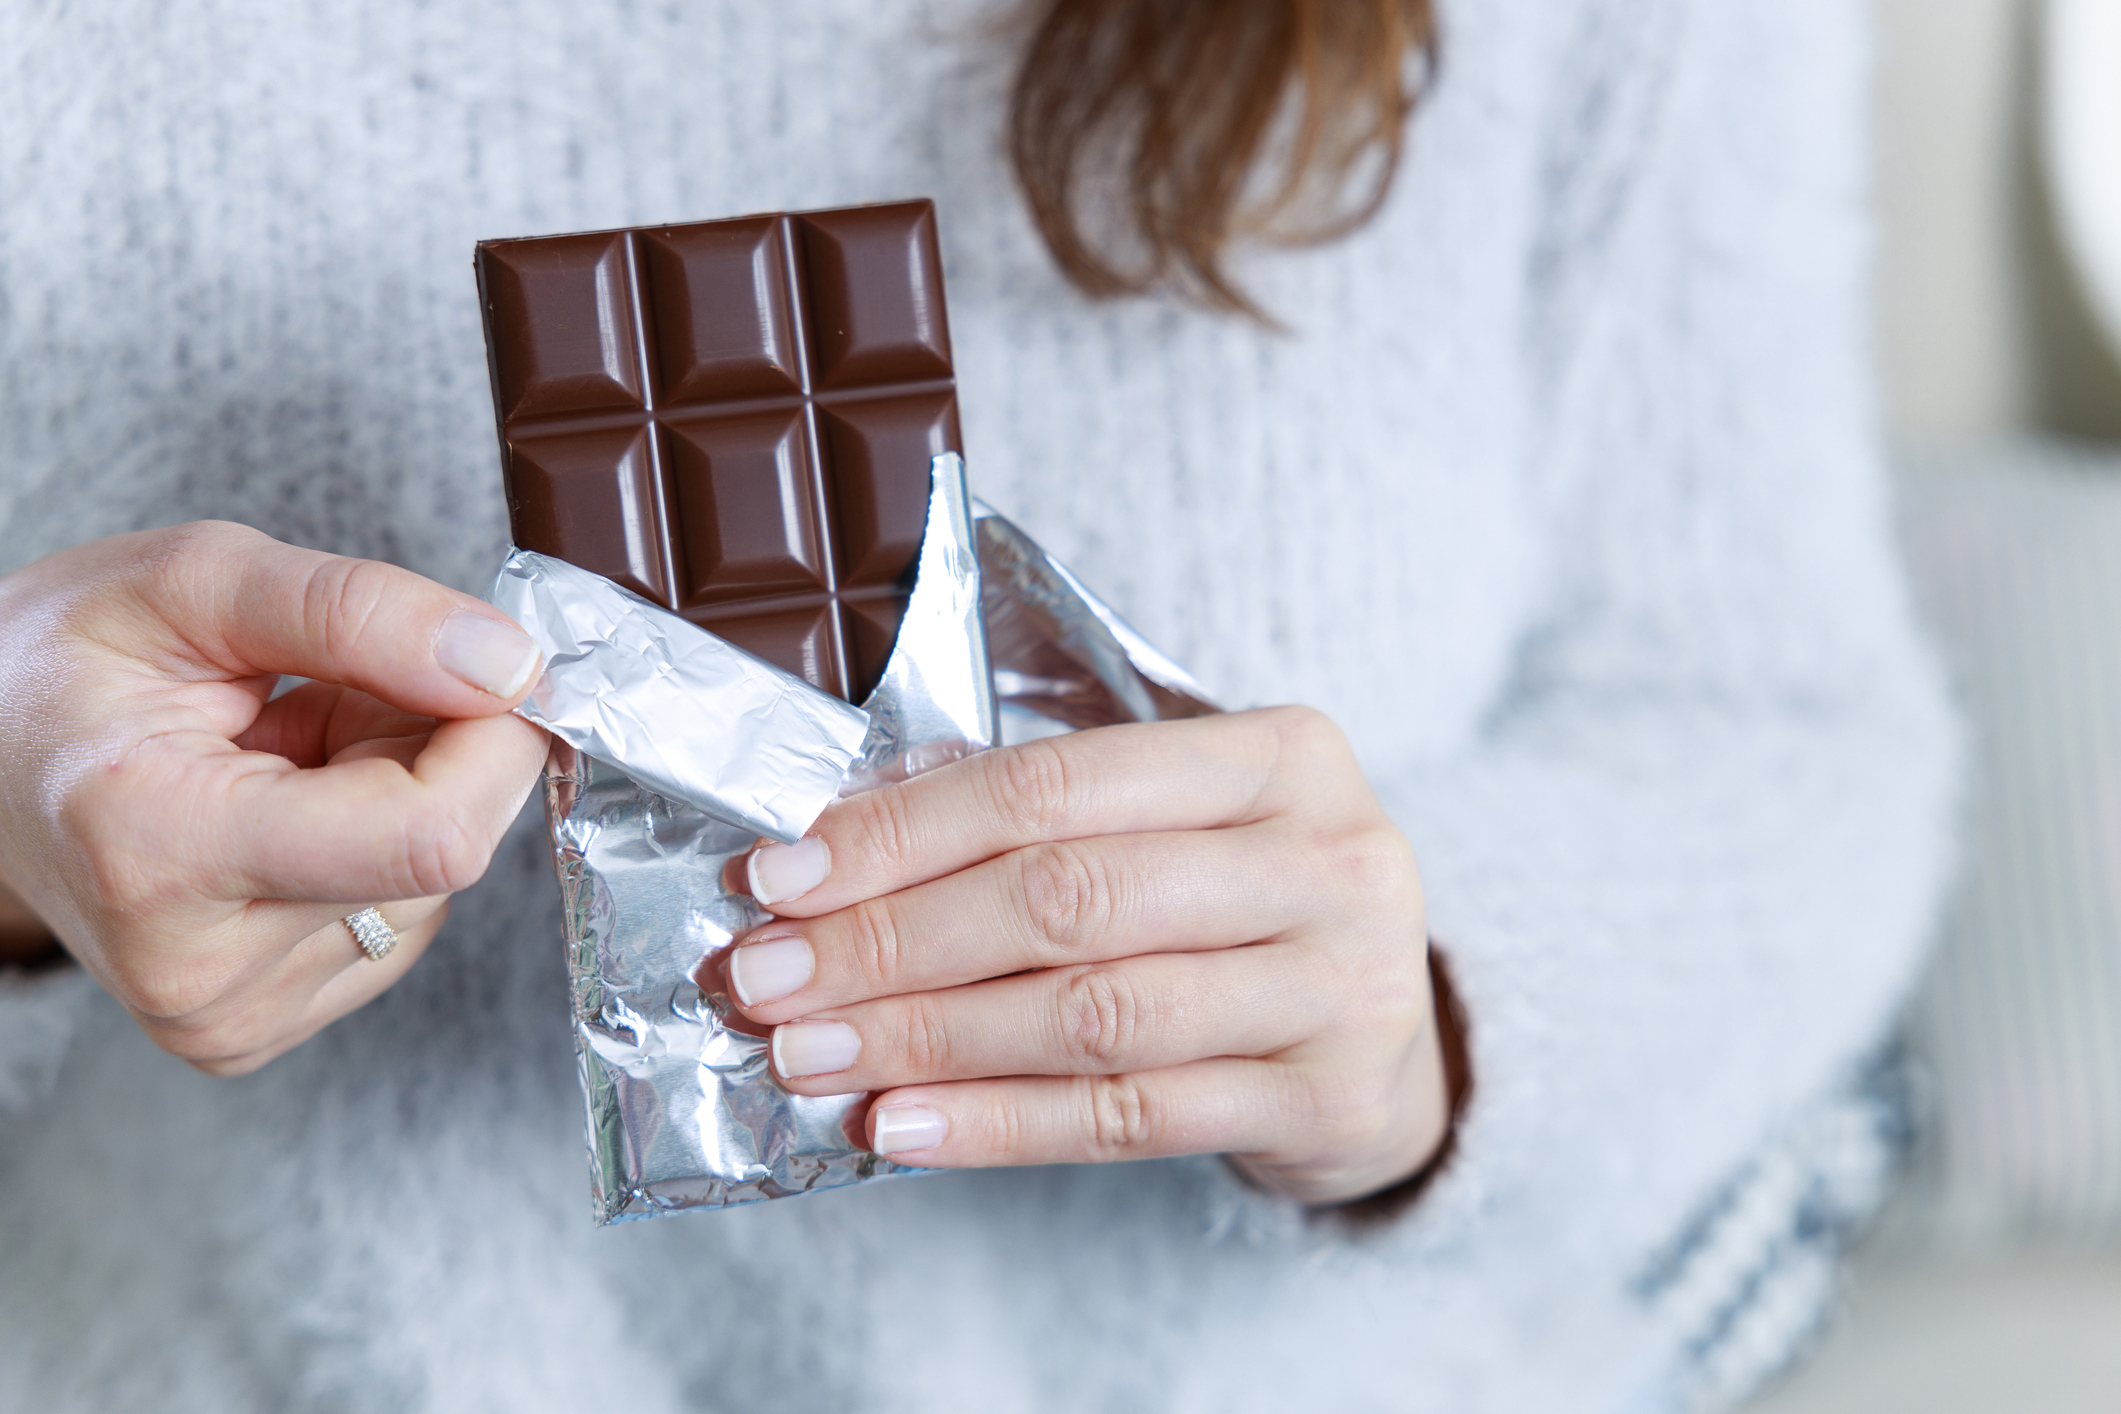 Hands of a woman holding a tile of chocolate. Chocolate bar in silver foil in woman's hand stock image